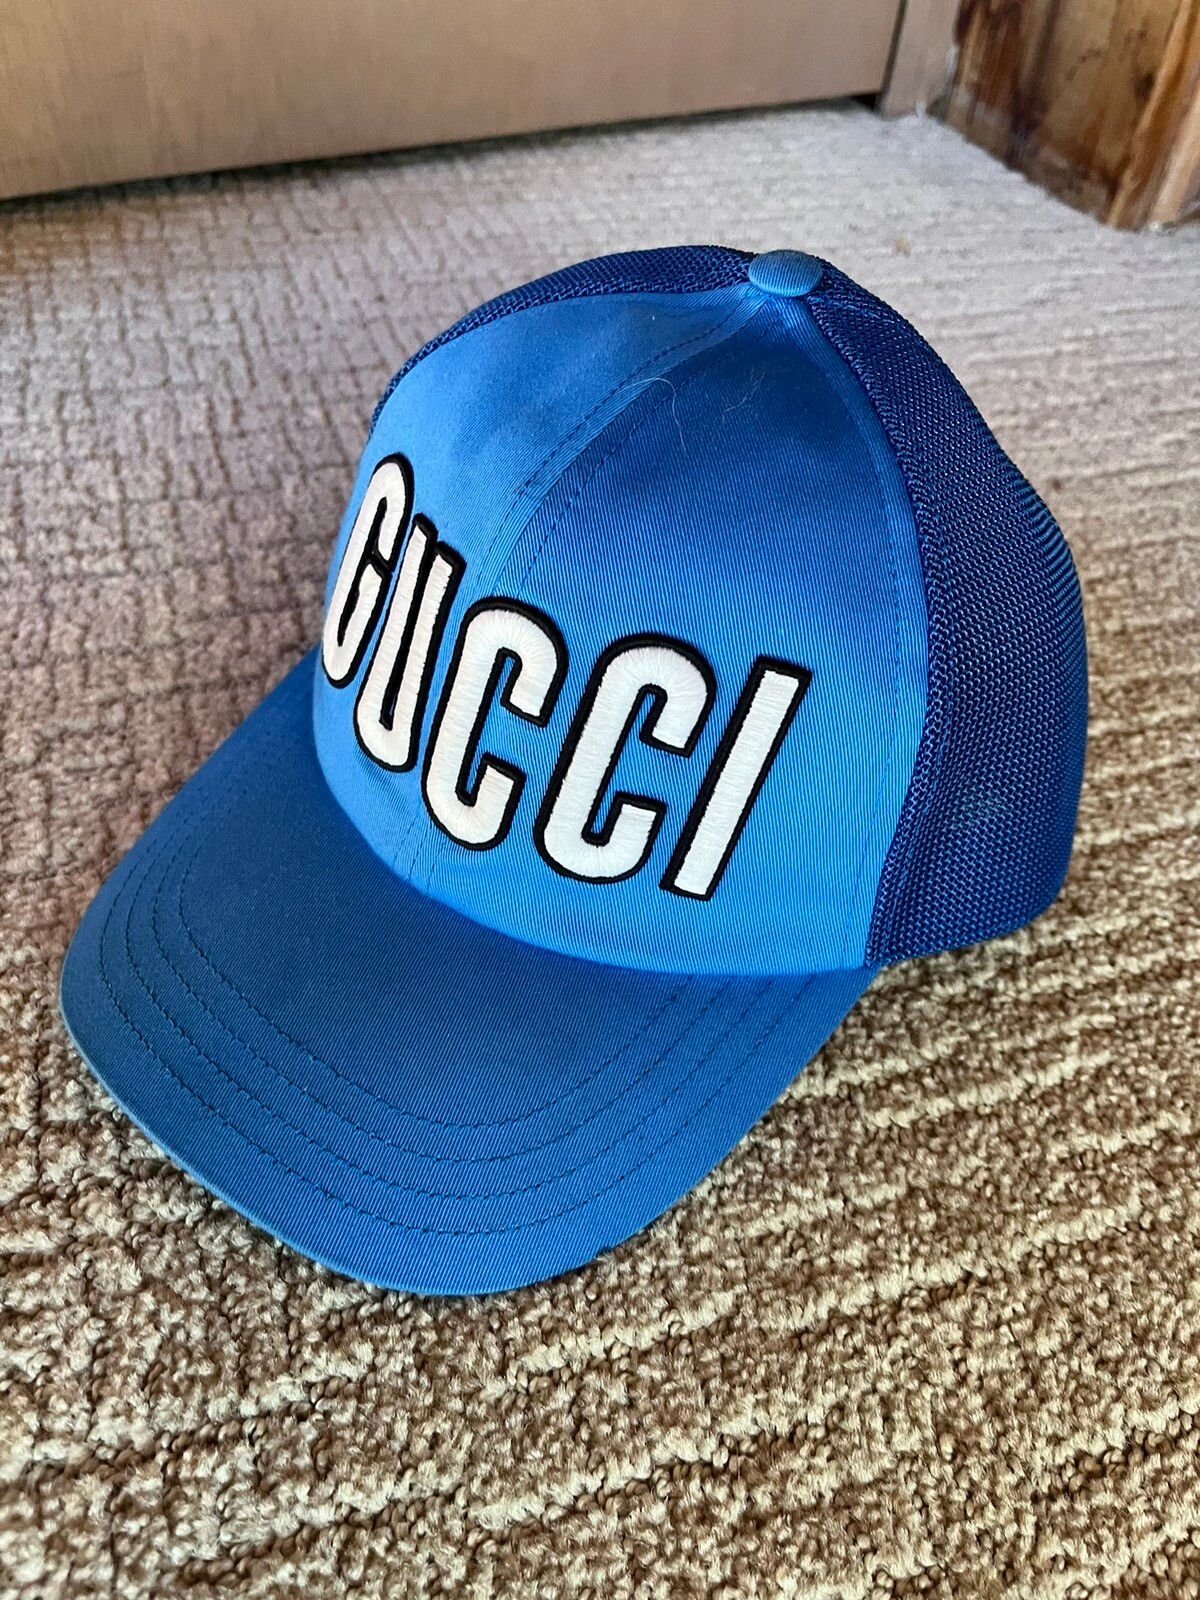 Gucci gucci embroidered mesh cap blue size large 59 cm | Grailed